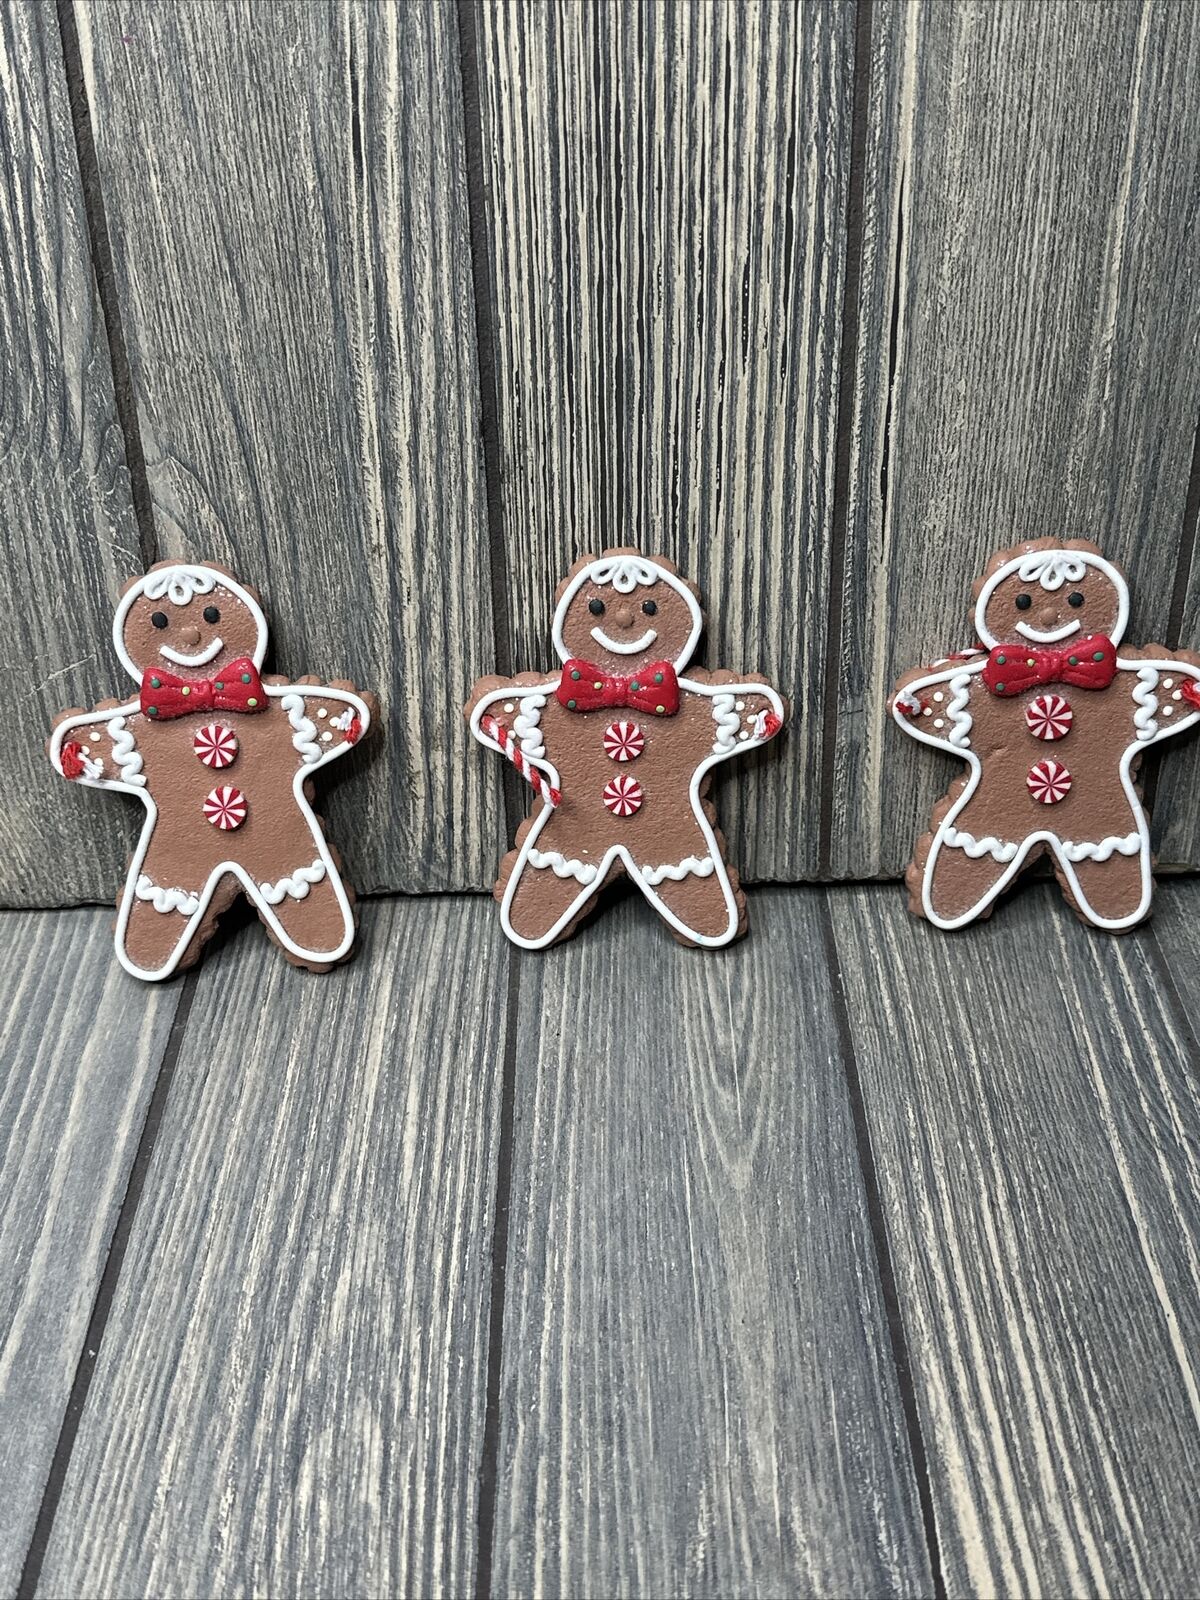 Vintage Lot Of 3 Gingerbread Man Decorations Clay 4”